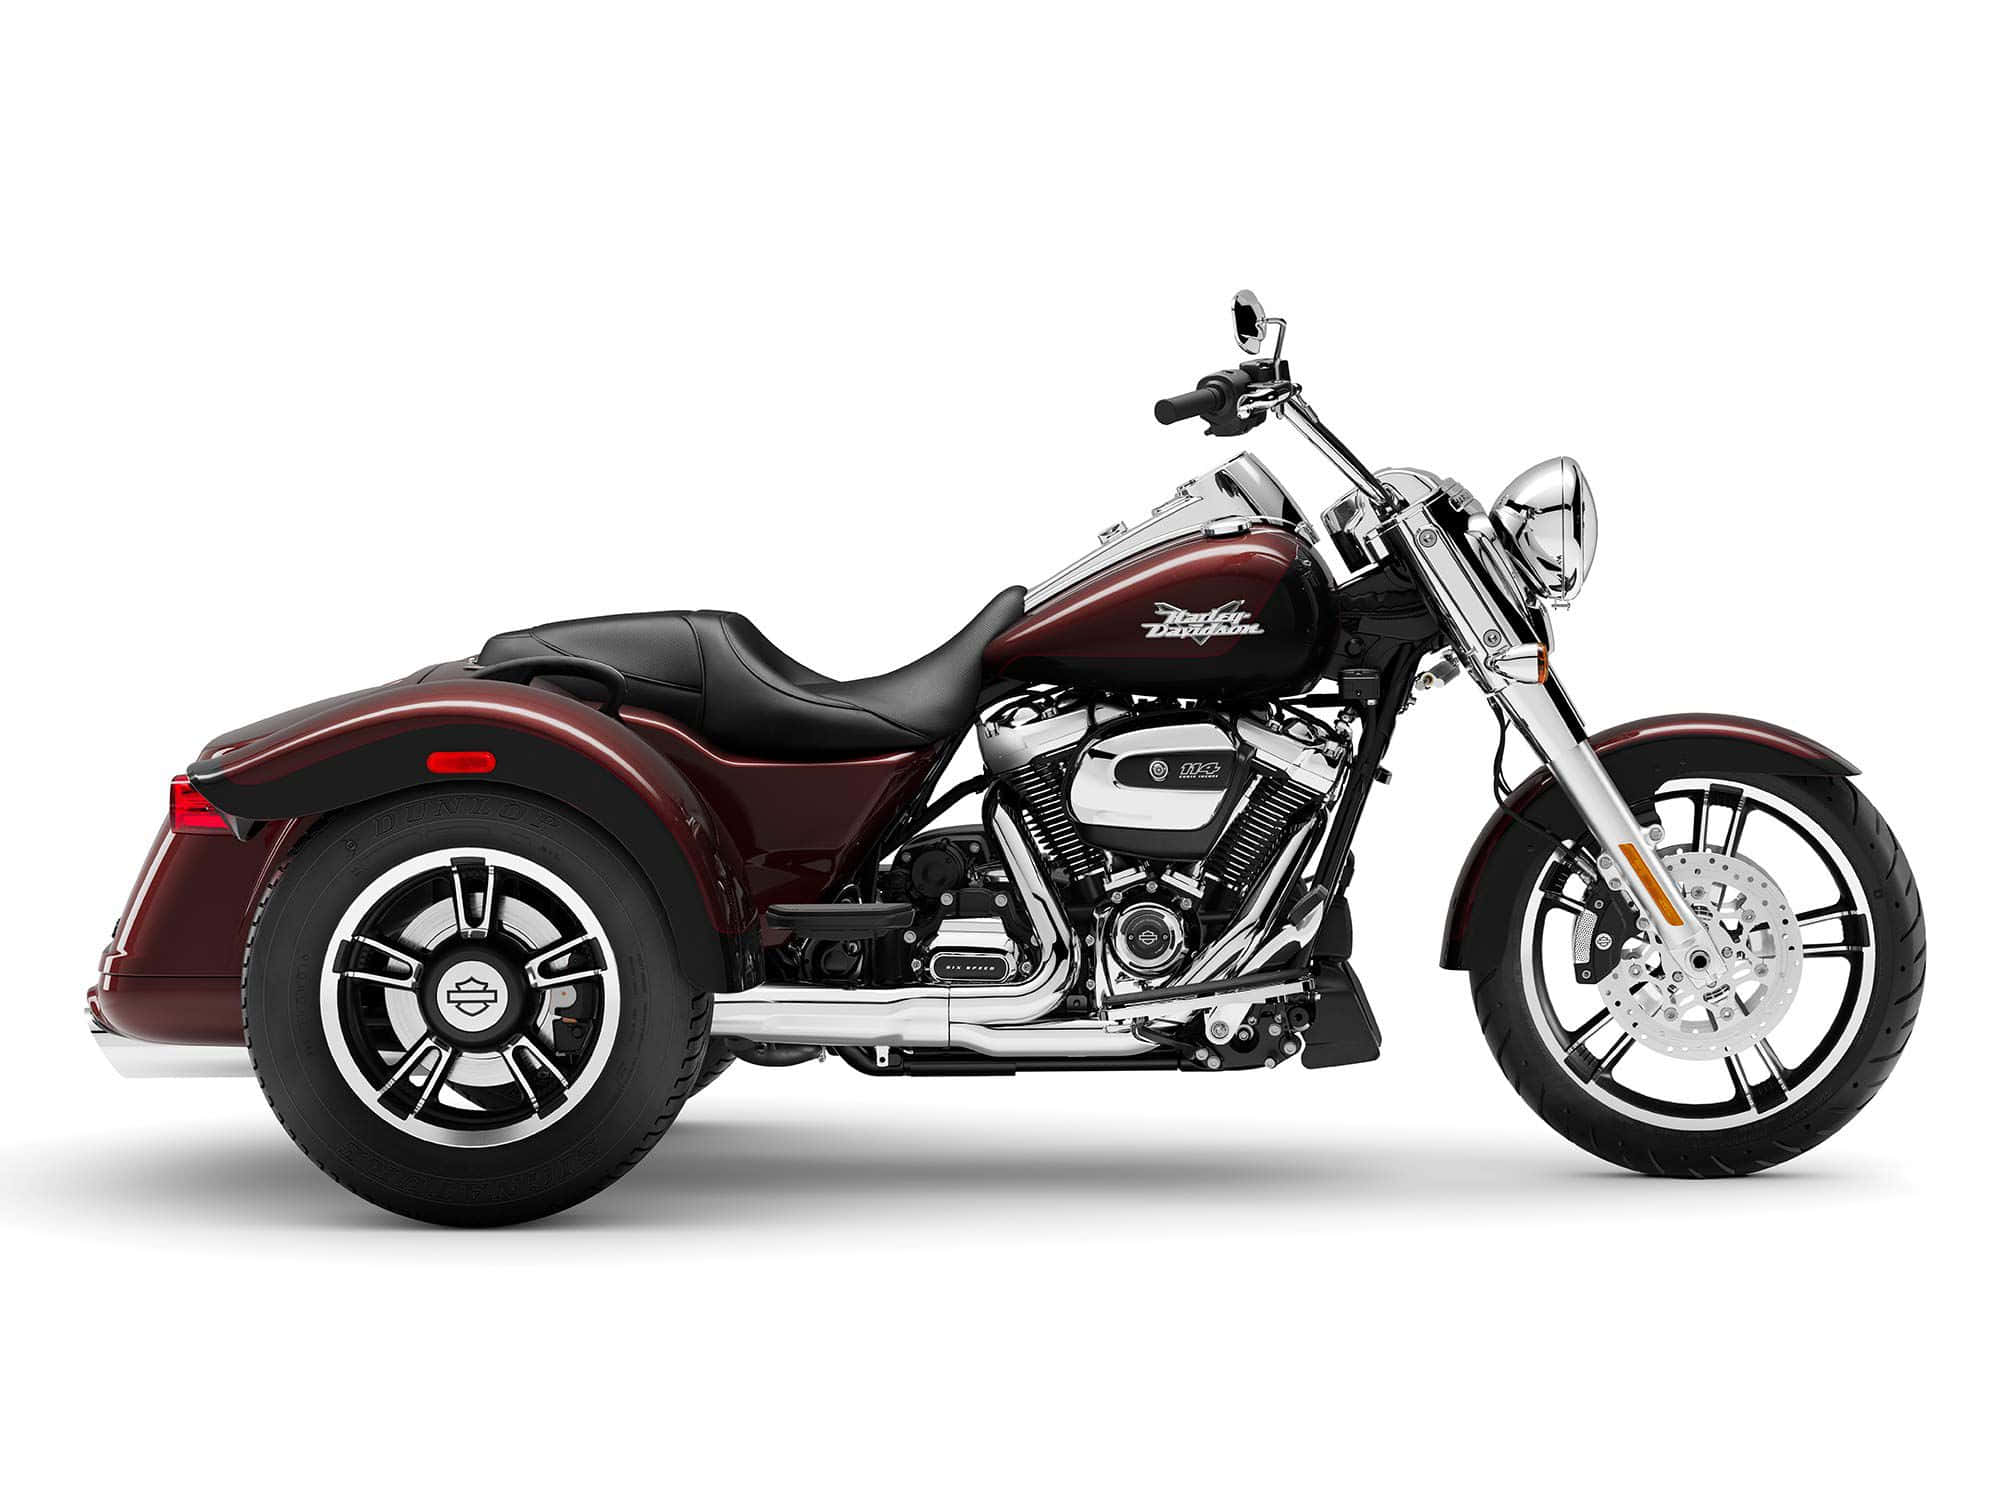 "Cruising around in style on a classic Harley-Davidson motorcycle"